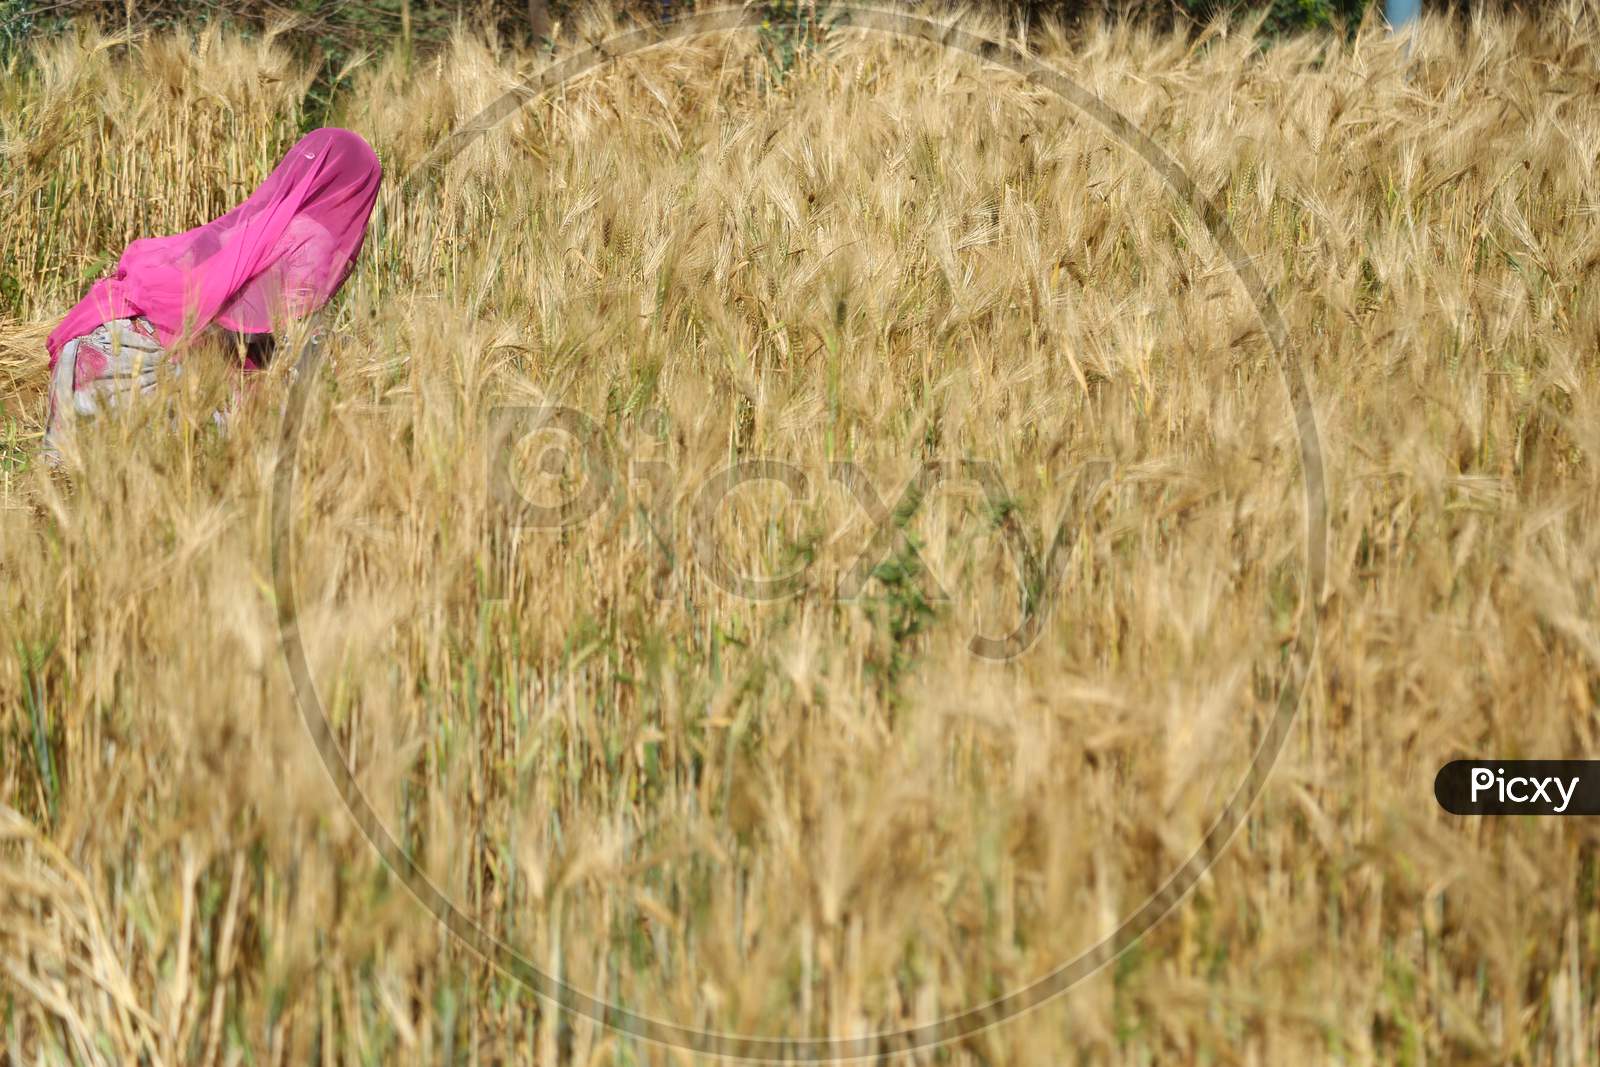 Indian farmer harvests wheat crop in outskirts village of Ajmer, Rajasthan, India